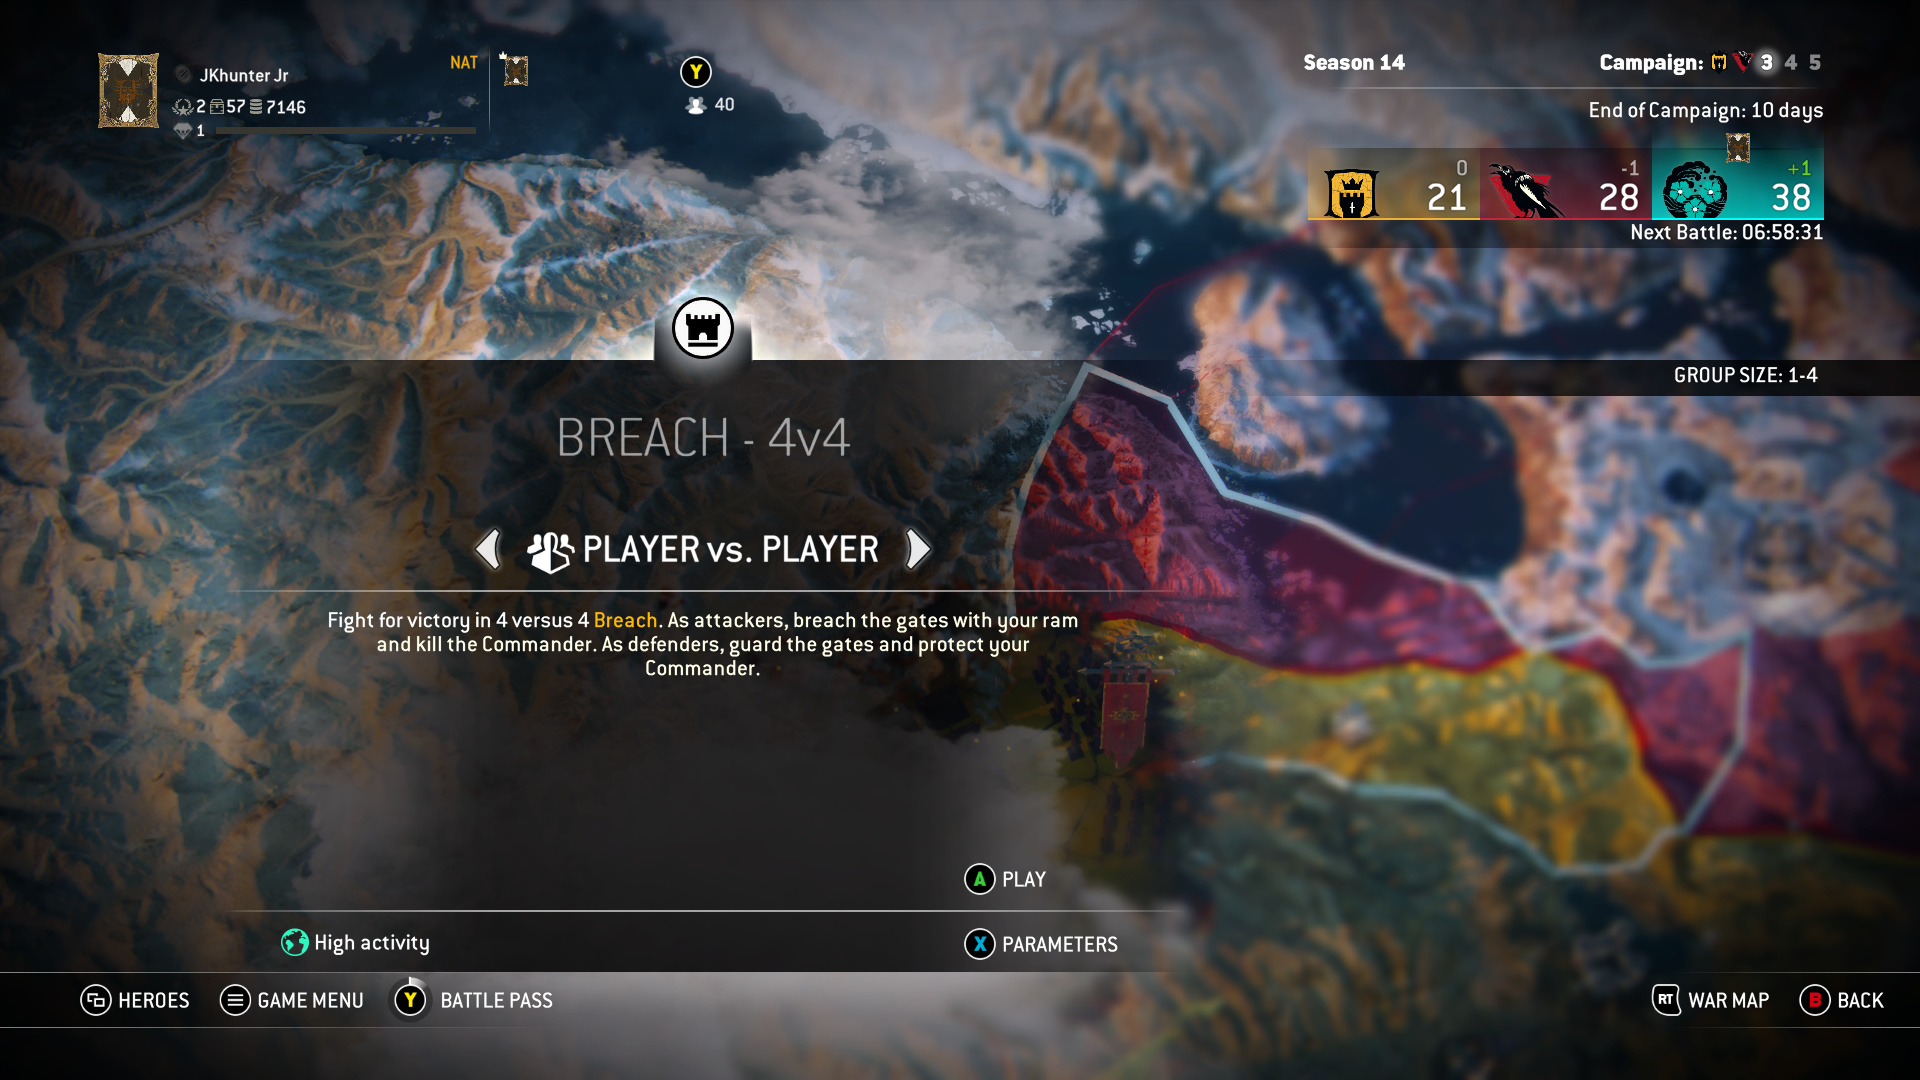 An in-game screenshot from For Honor displaying the playlist menu. It displays the 4v4 player-versus-player mode, called Breach.